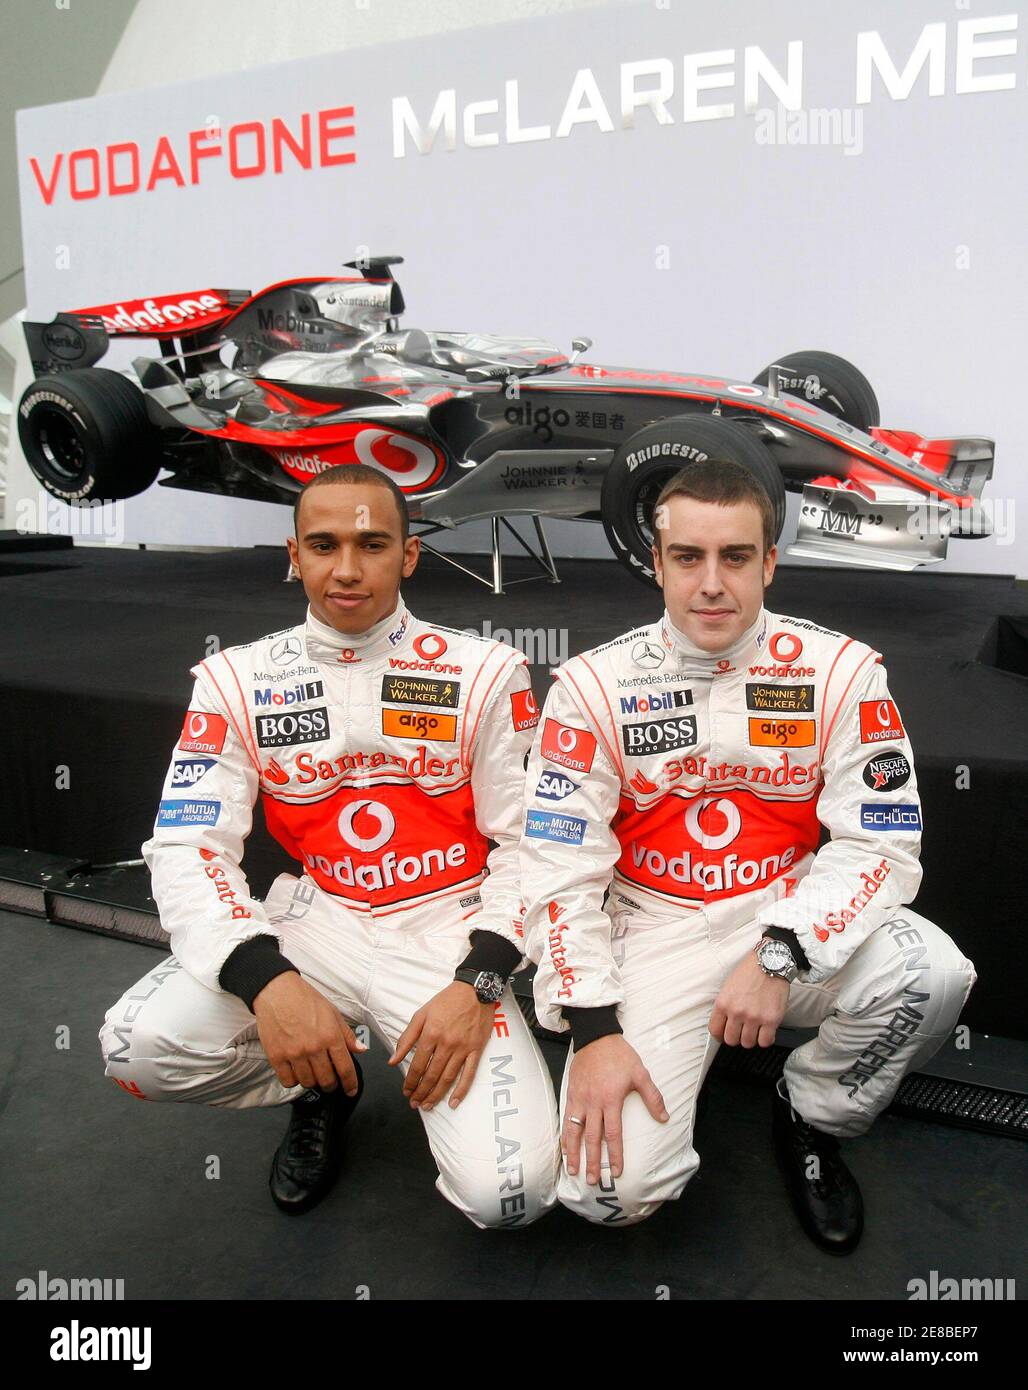 Formula One World Champion Fernando Alonso (R) and team-mate Lewis Hamilton  kneel in front of the new McLaren MP4-22 during the official presentation  of the McLaren Formula One Team in Valencia January